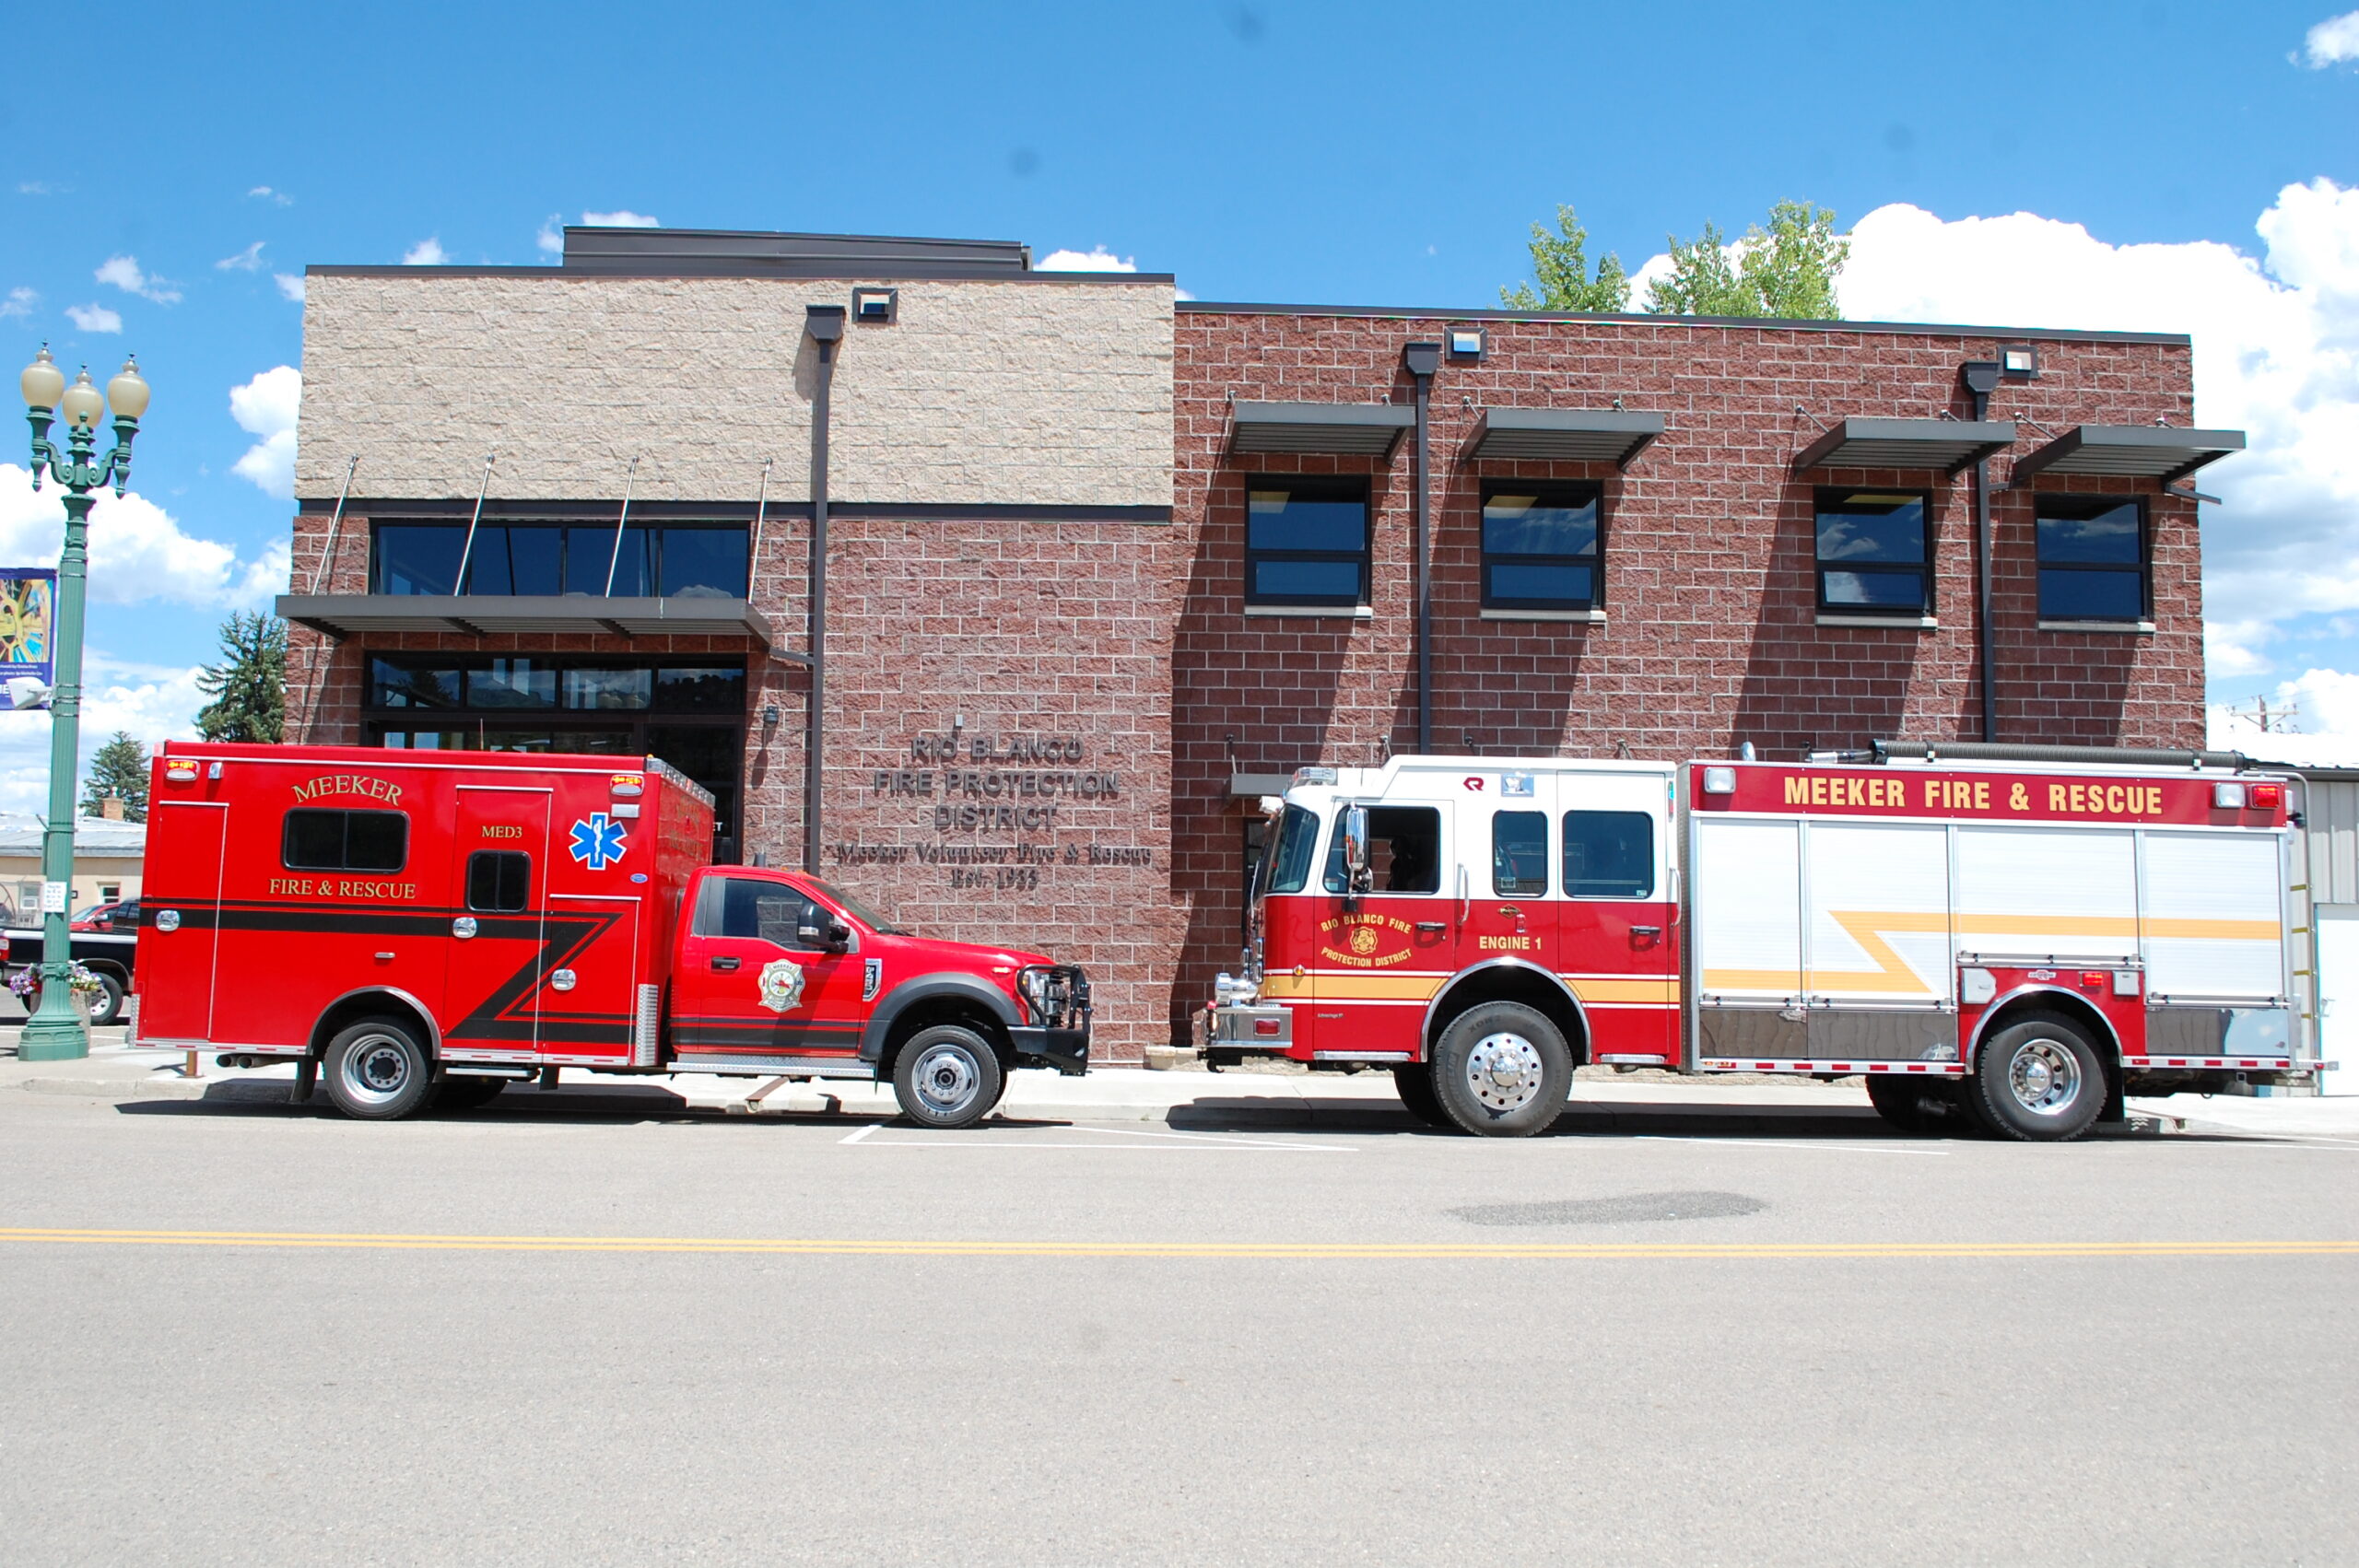 Photo of the Meeker Volunteer Fire Department with fire engine and rescue vehicle parked in front